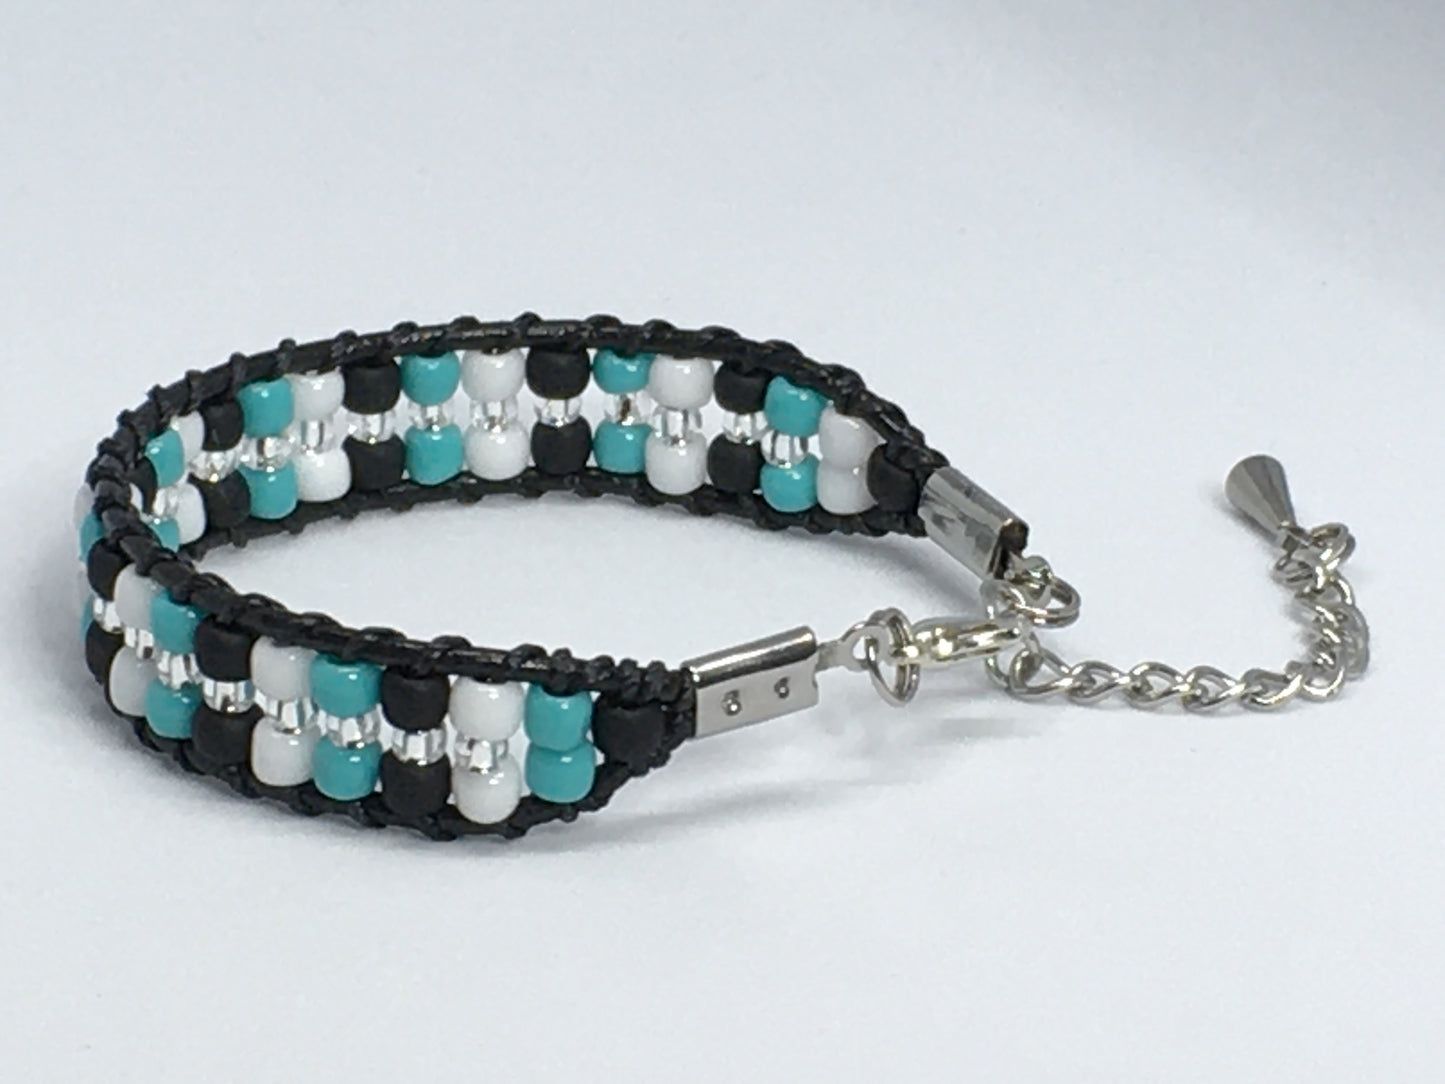 5.75" Bead and Leather Women's Bracelet